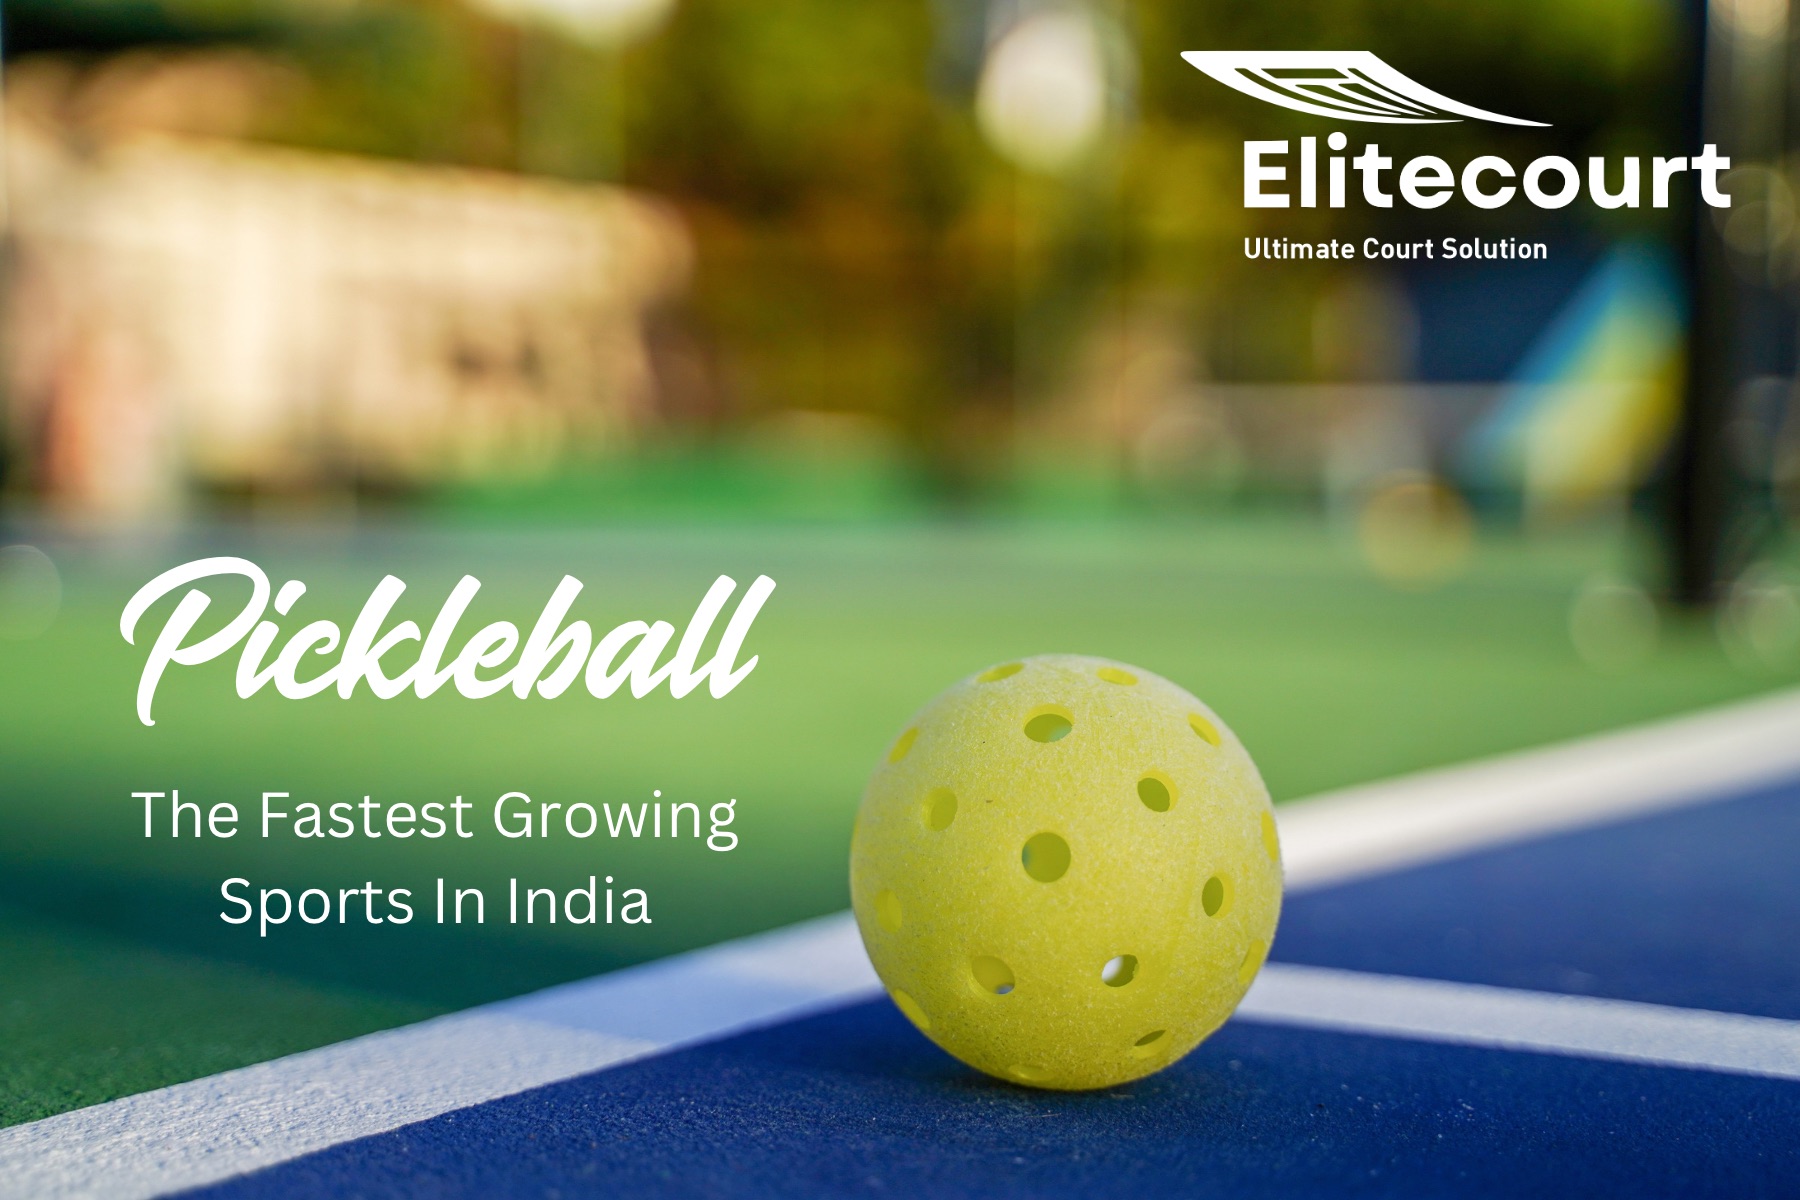 Pickleball - The Fastest Growing Sport in India